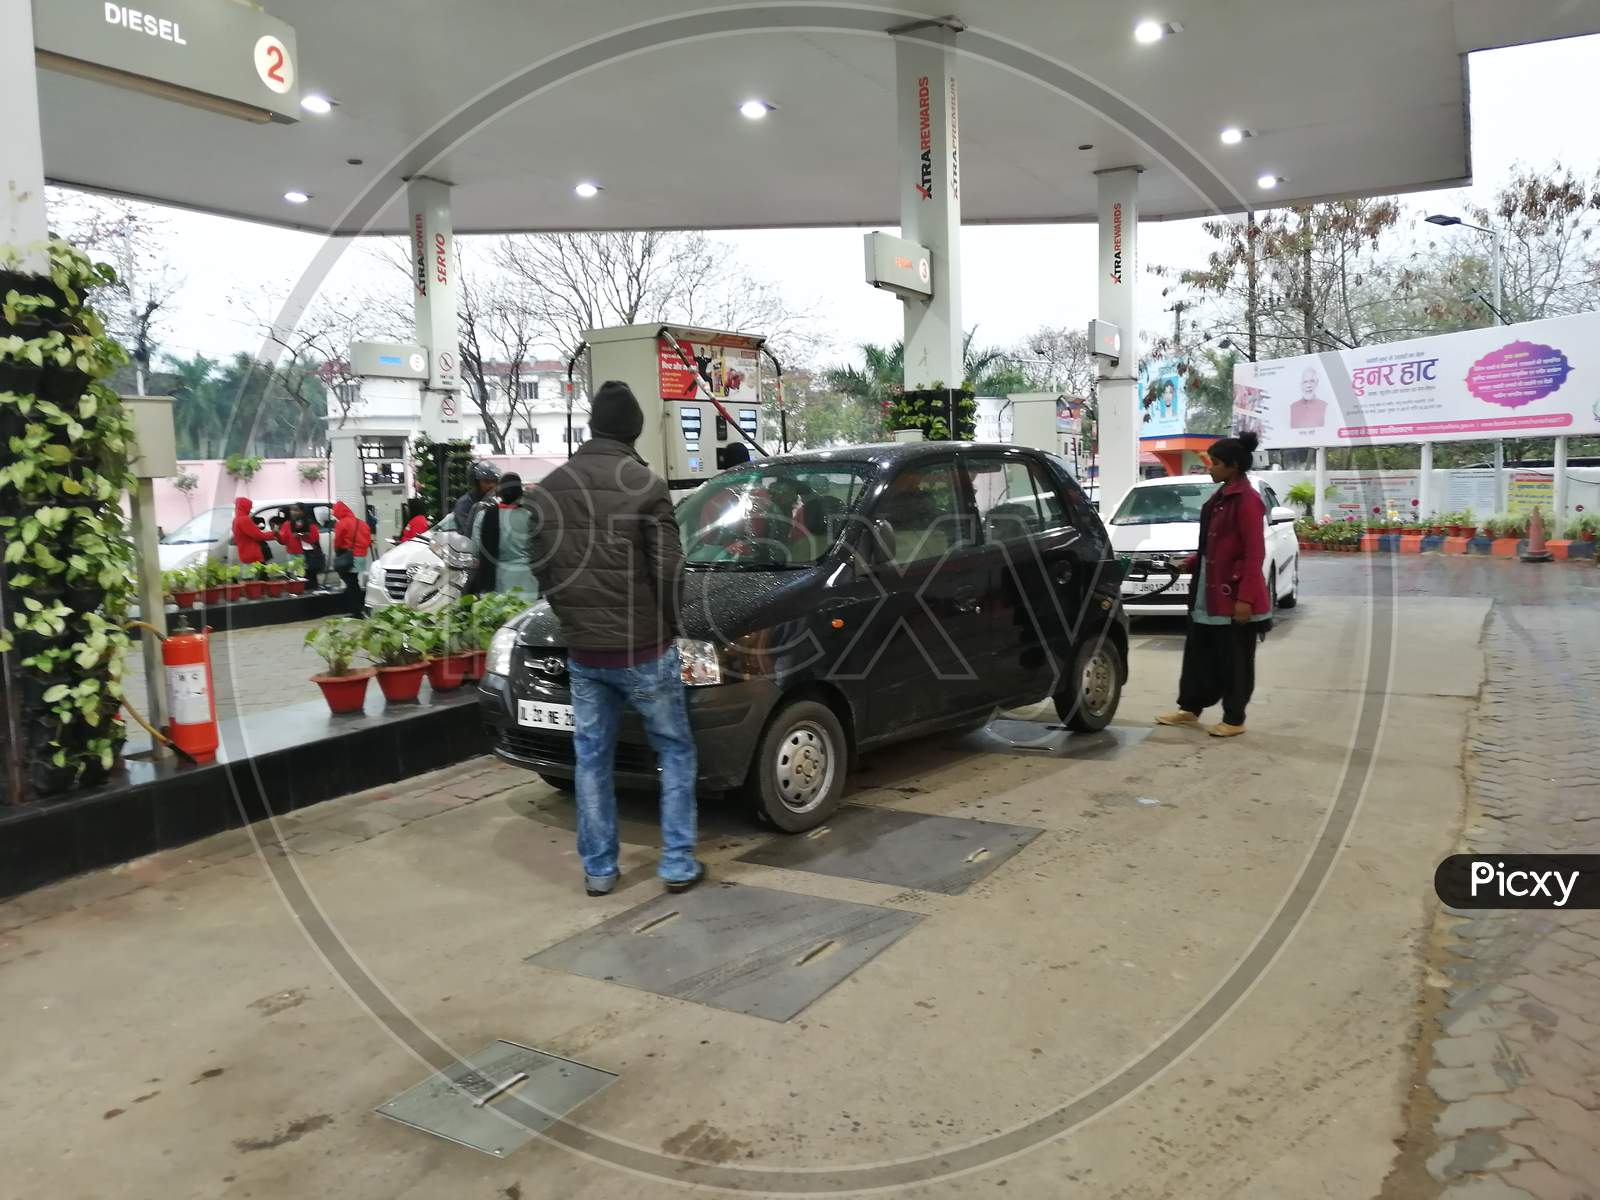 Car at petrol station for petrol and diesel